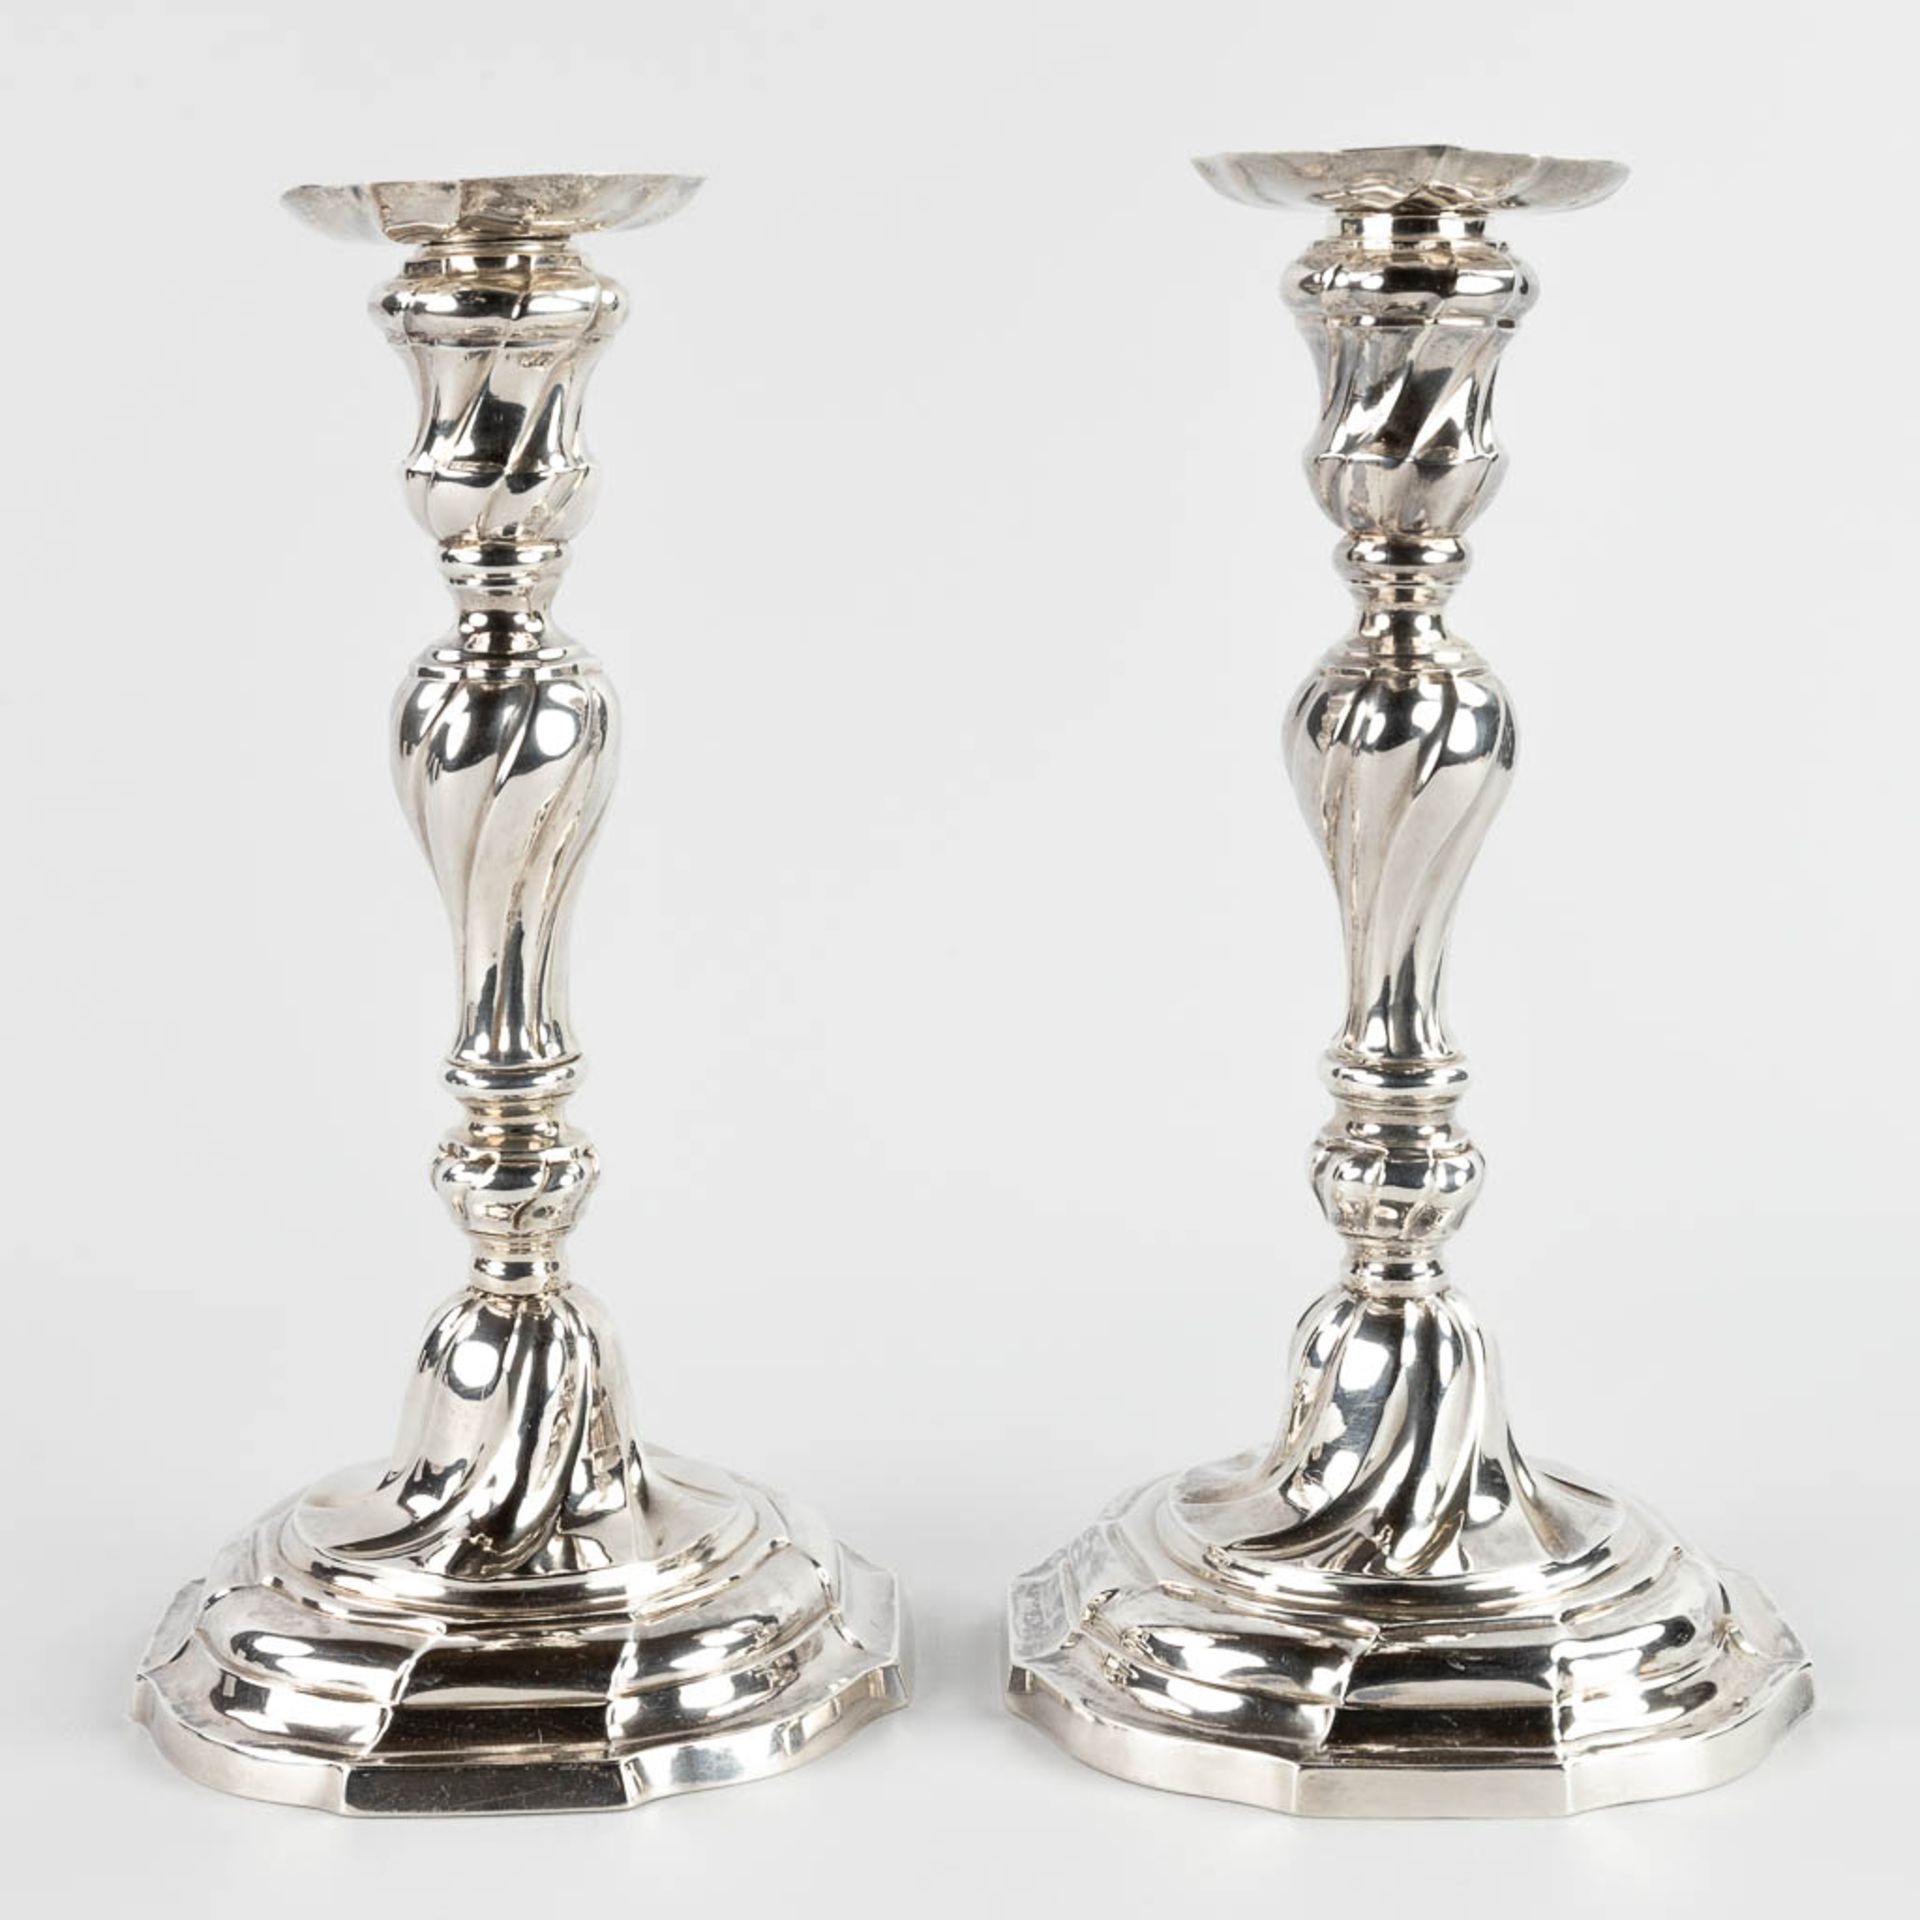 A pair of antique silver candlesticks, Ghent, 1777. Marked N.J. Viene (Viette?). Belgium, 18th C. 61 - Image 4 of 10